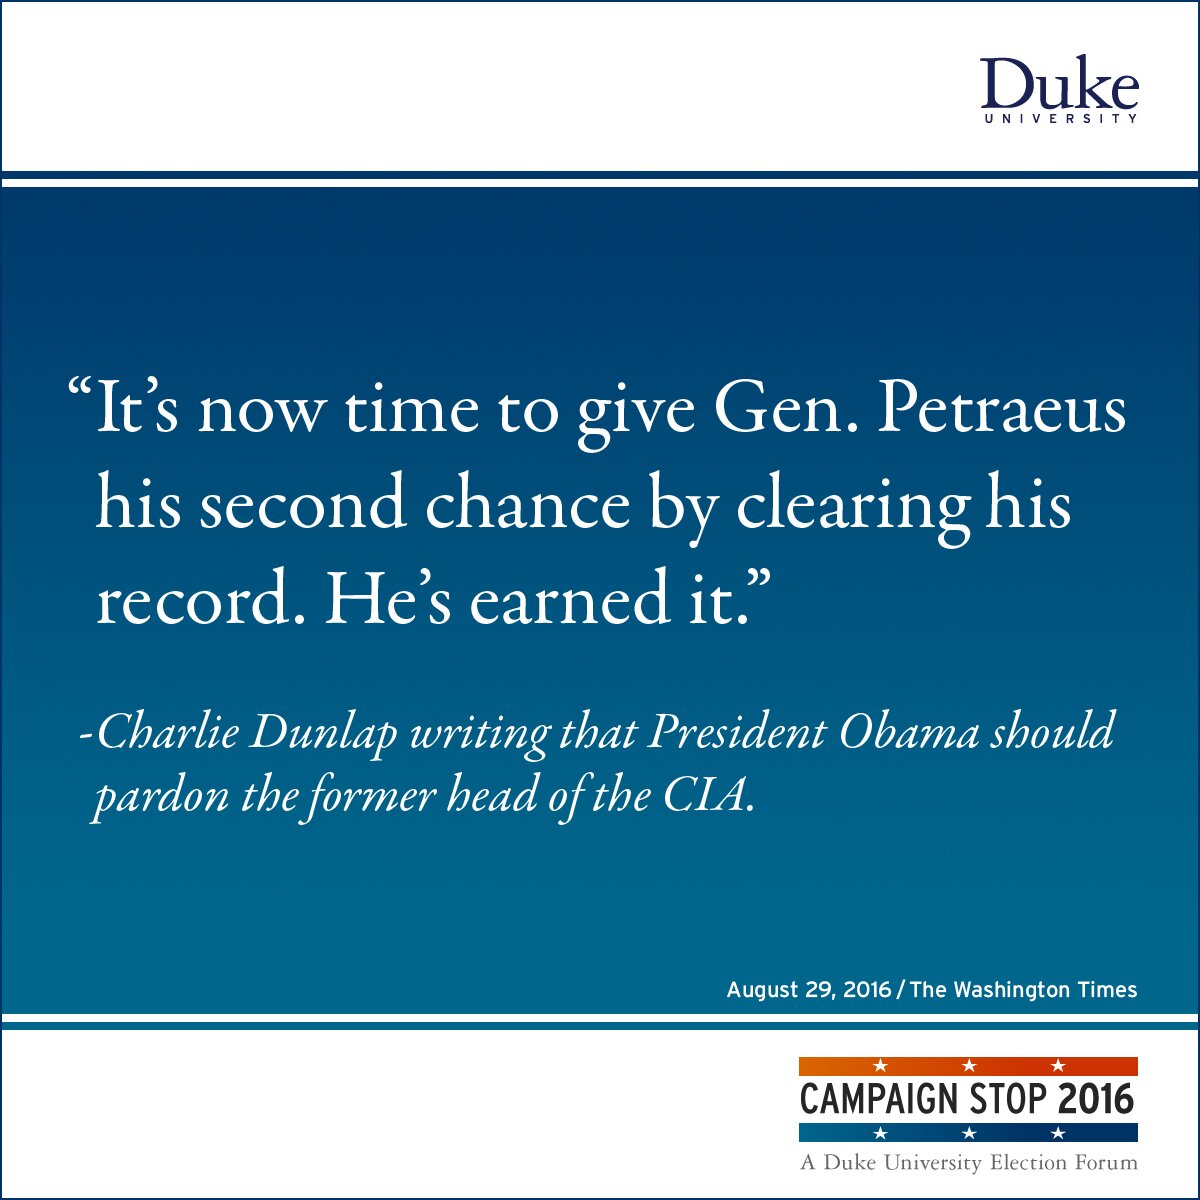 “It’s now time to give Gen. Petraeus his second chance by clearing his record. He’s earned it.” -Charlie Dunlap writing that President Obama should pardon the former head of the CIA.